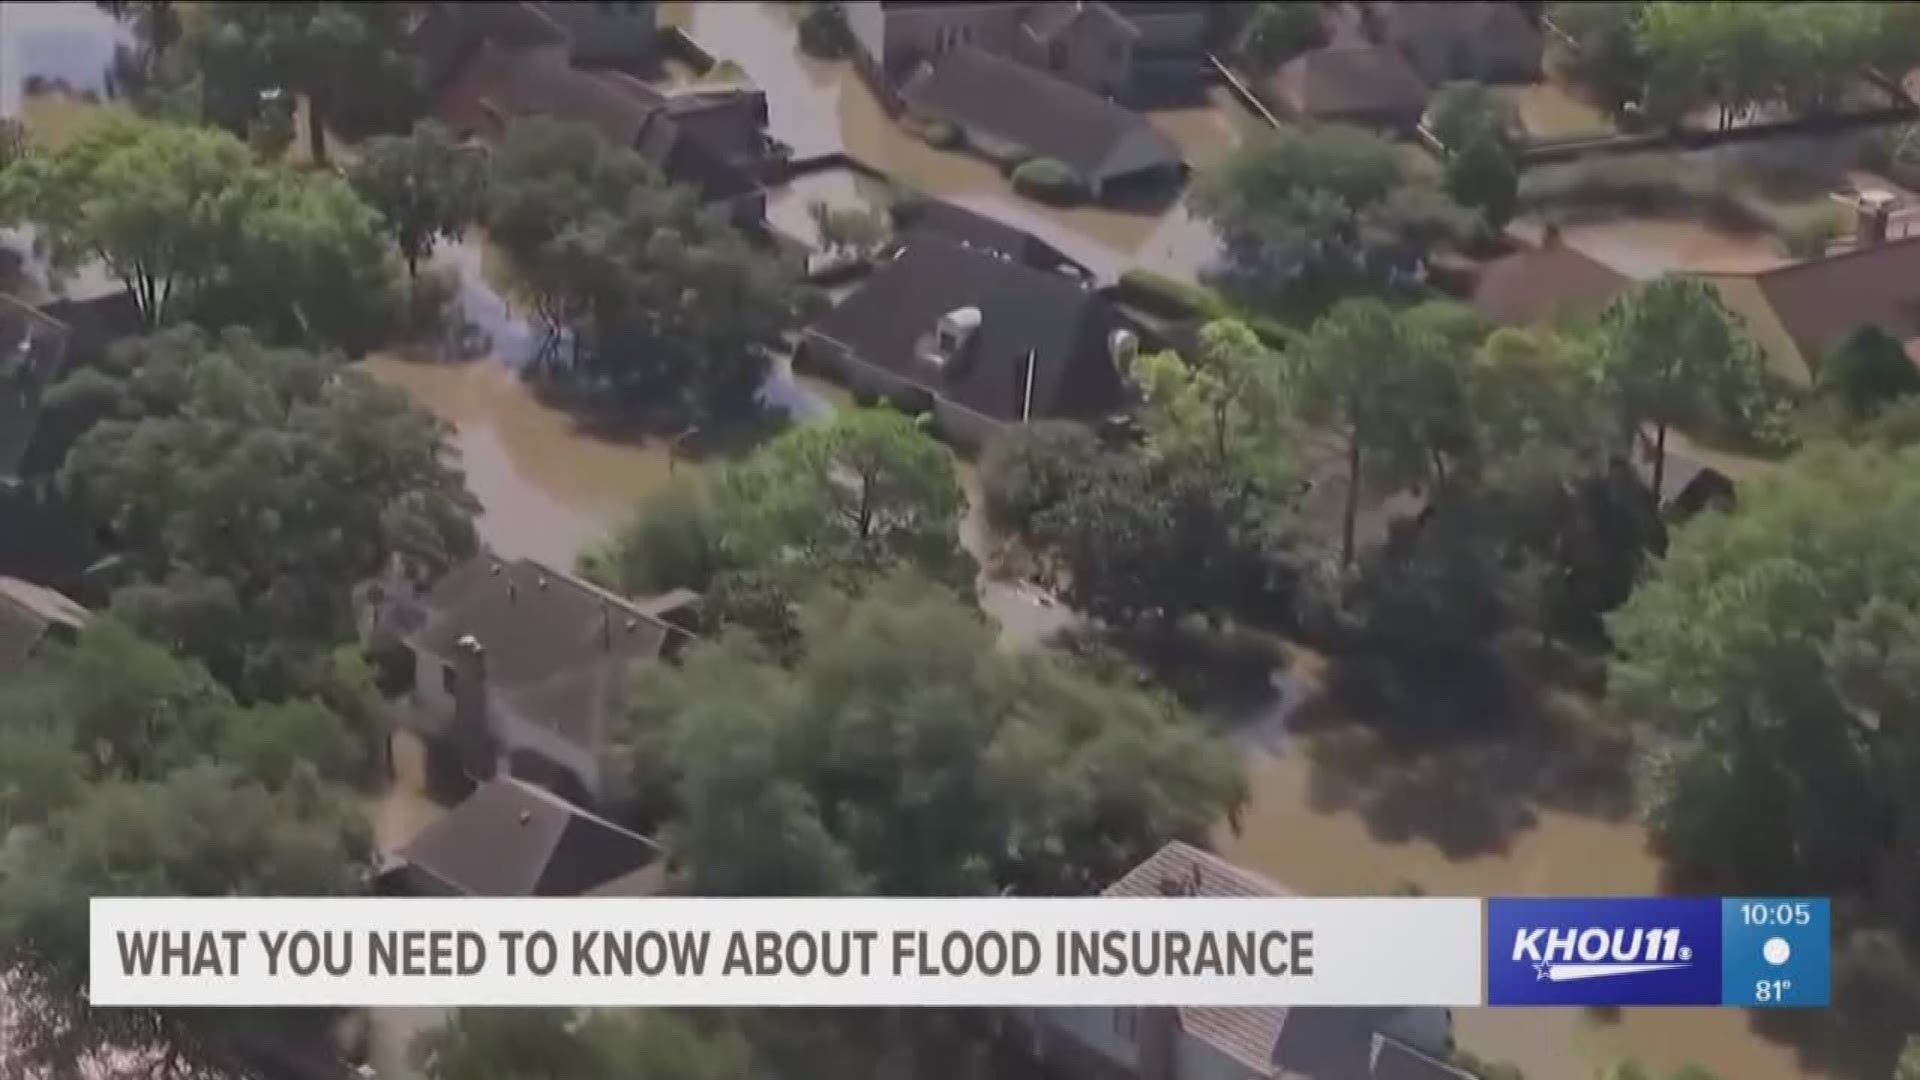 Year after year, Houston's floods have devastated thousands of people, however, many still aren't buying flood insurance.